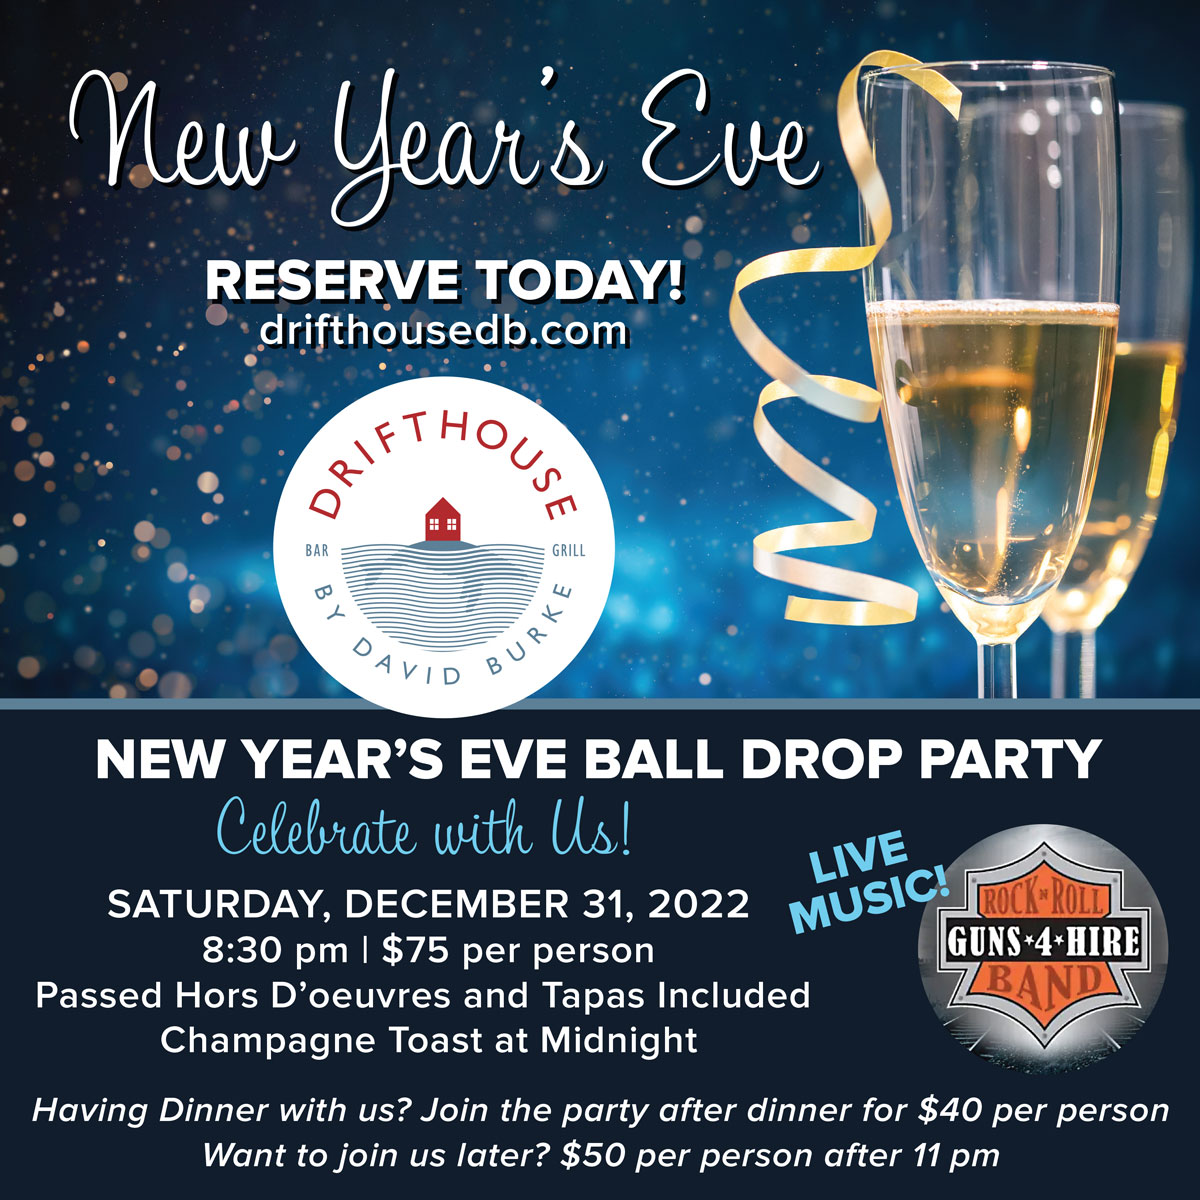 New Year's Eve at Drifthouse